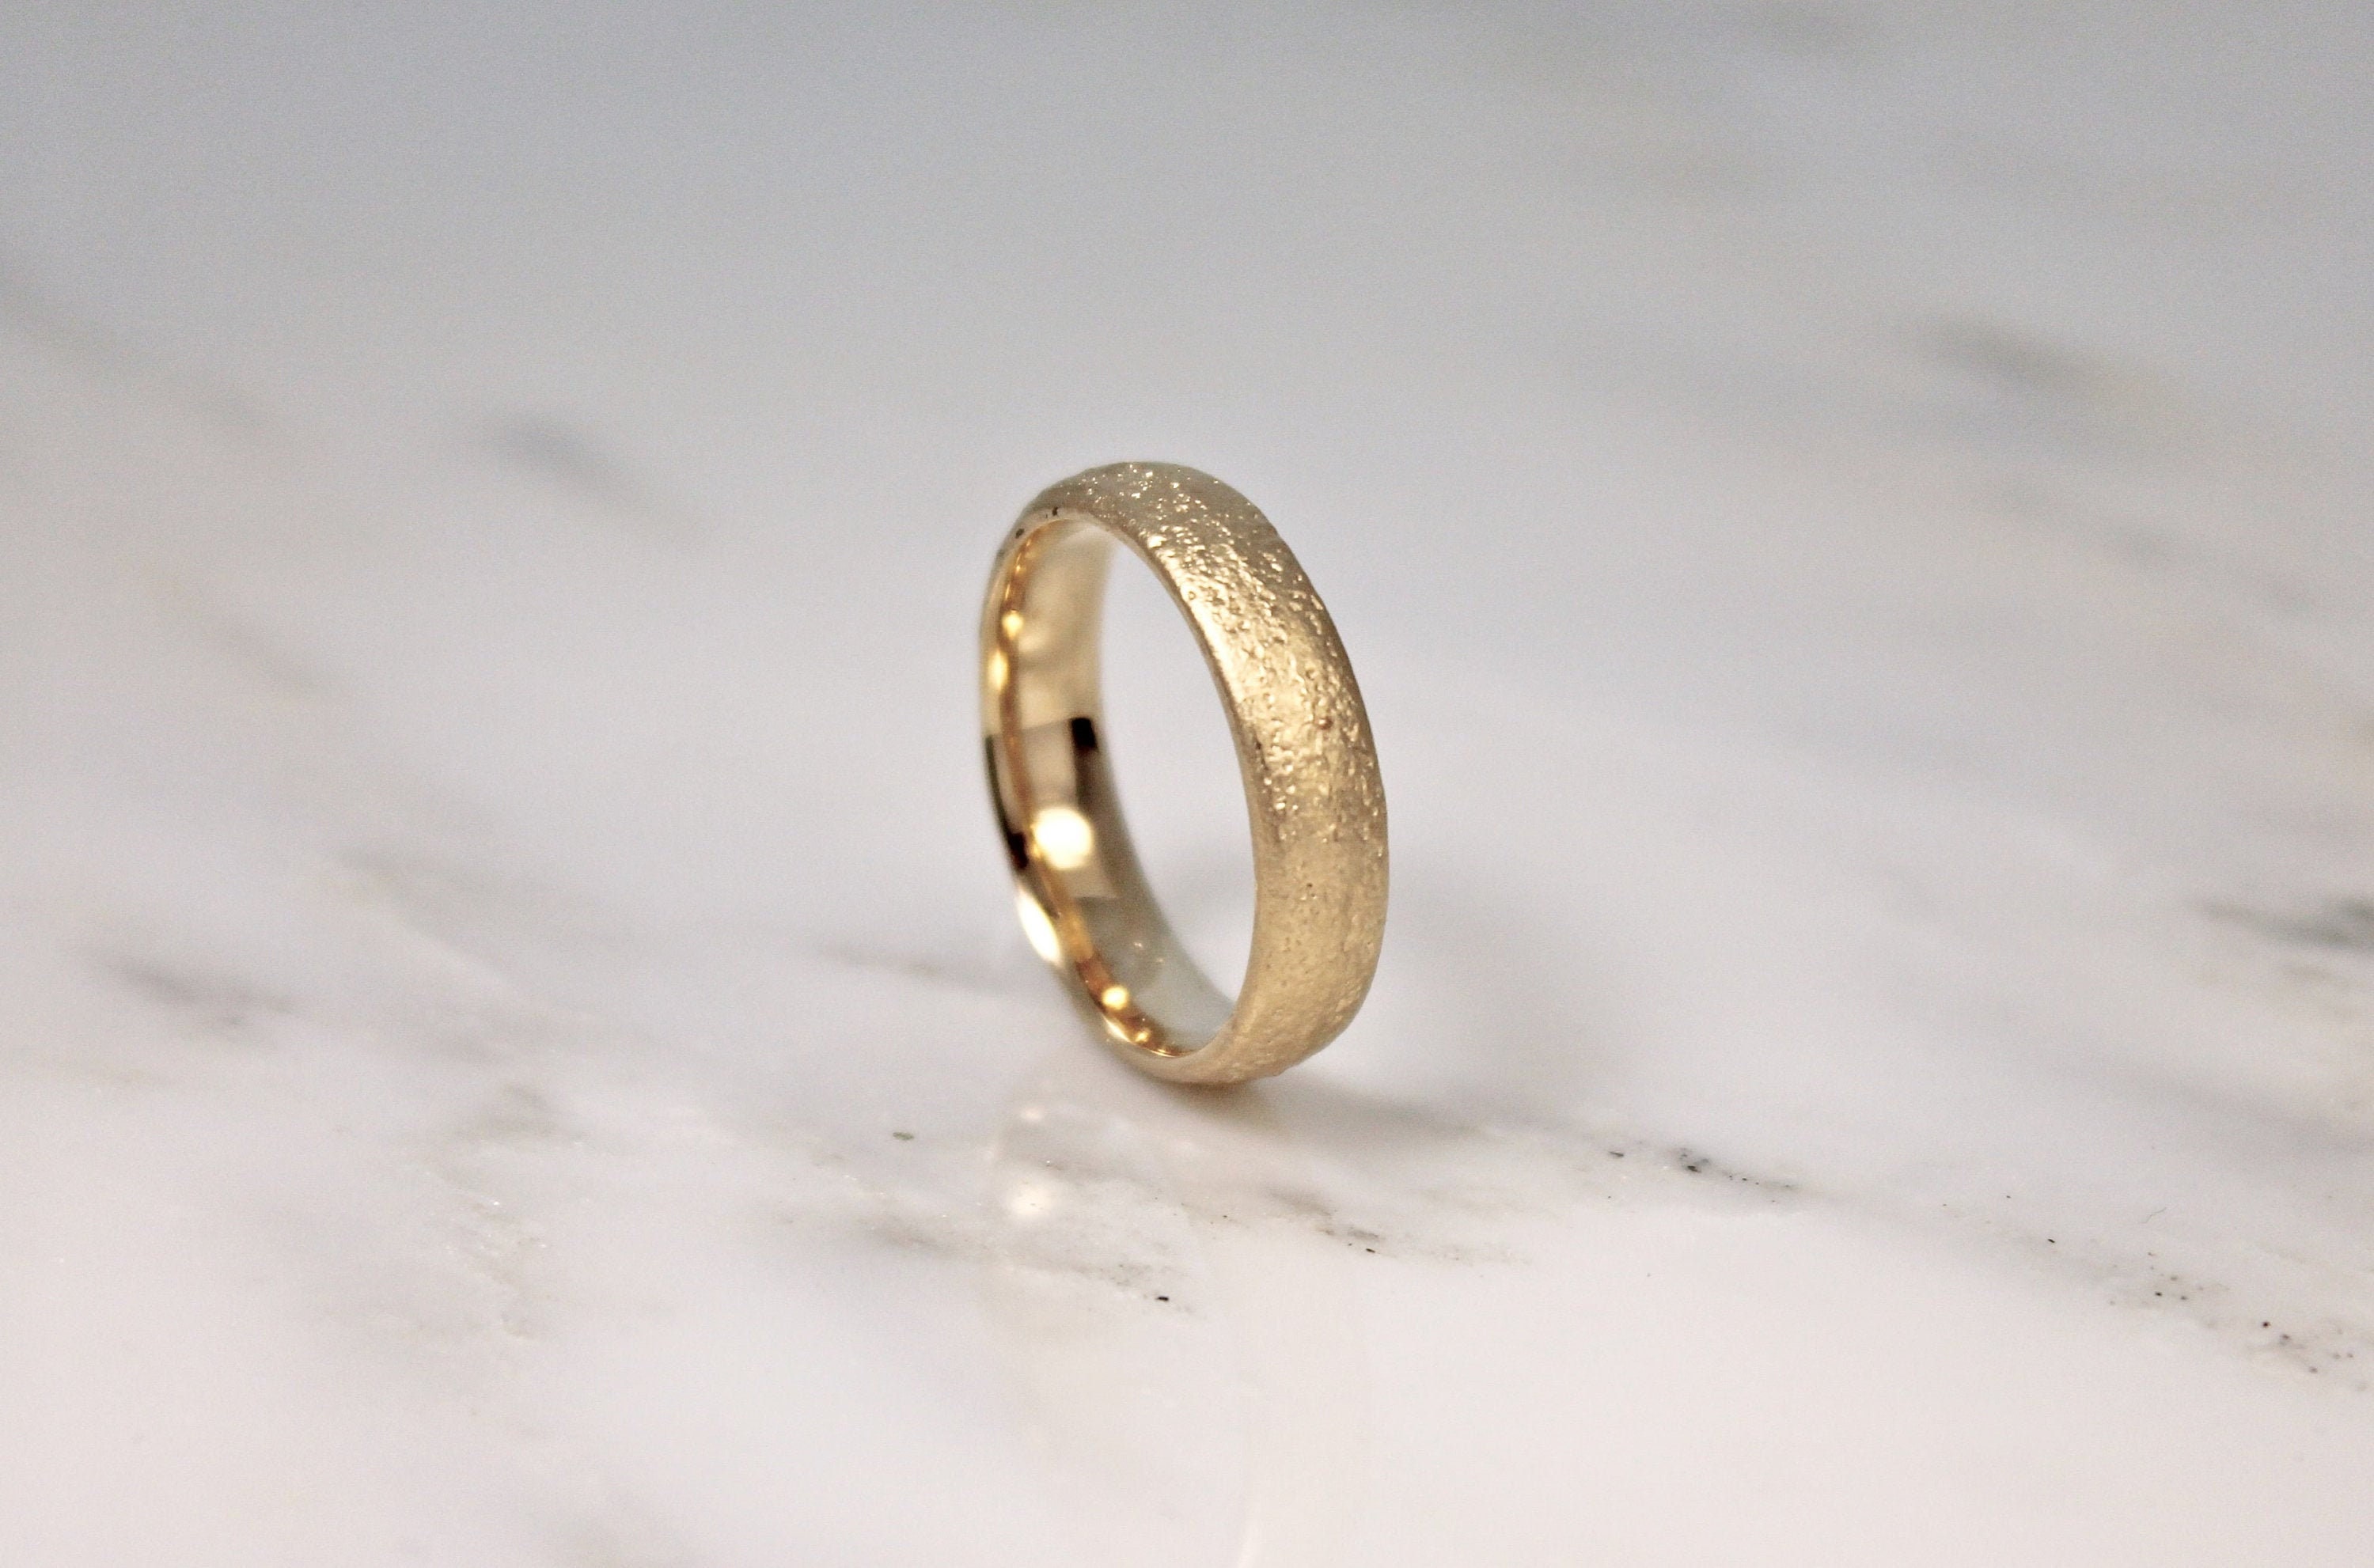 9Ct Yellow Gold Sandcast Wedding Ring, 5mm Textured Band, Rustic Organic Natural Design. Woodengold